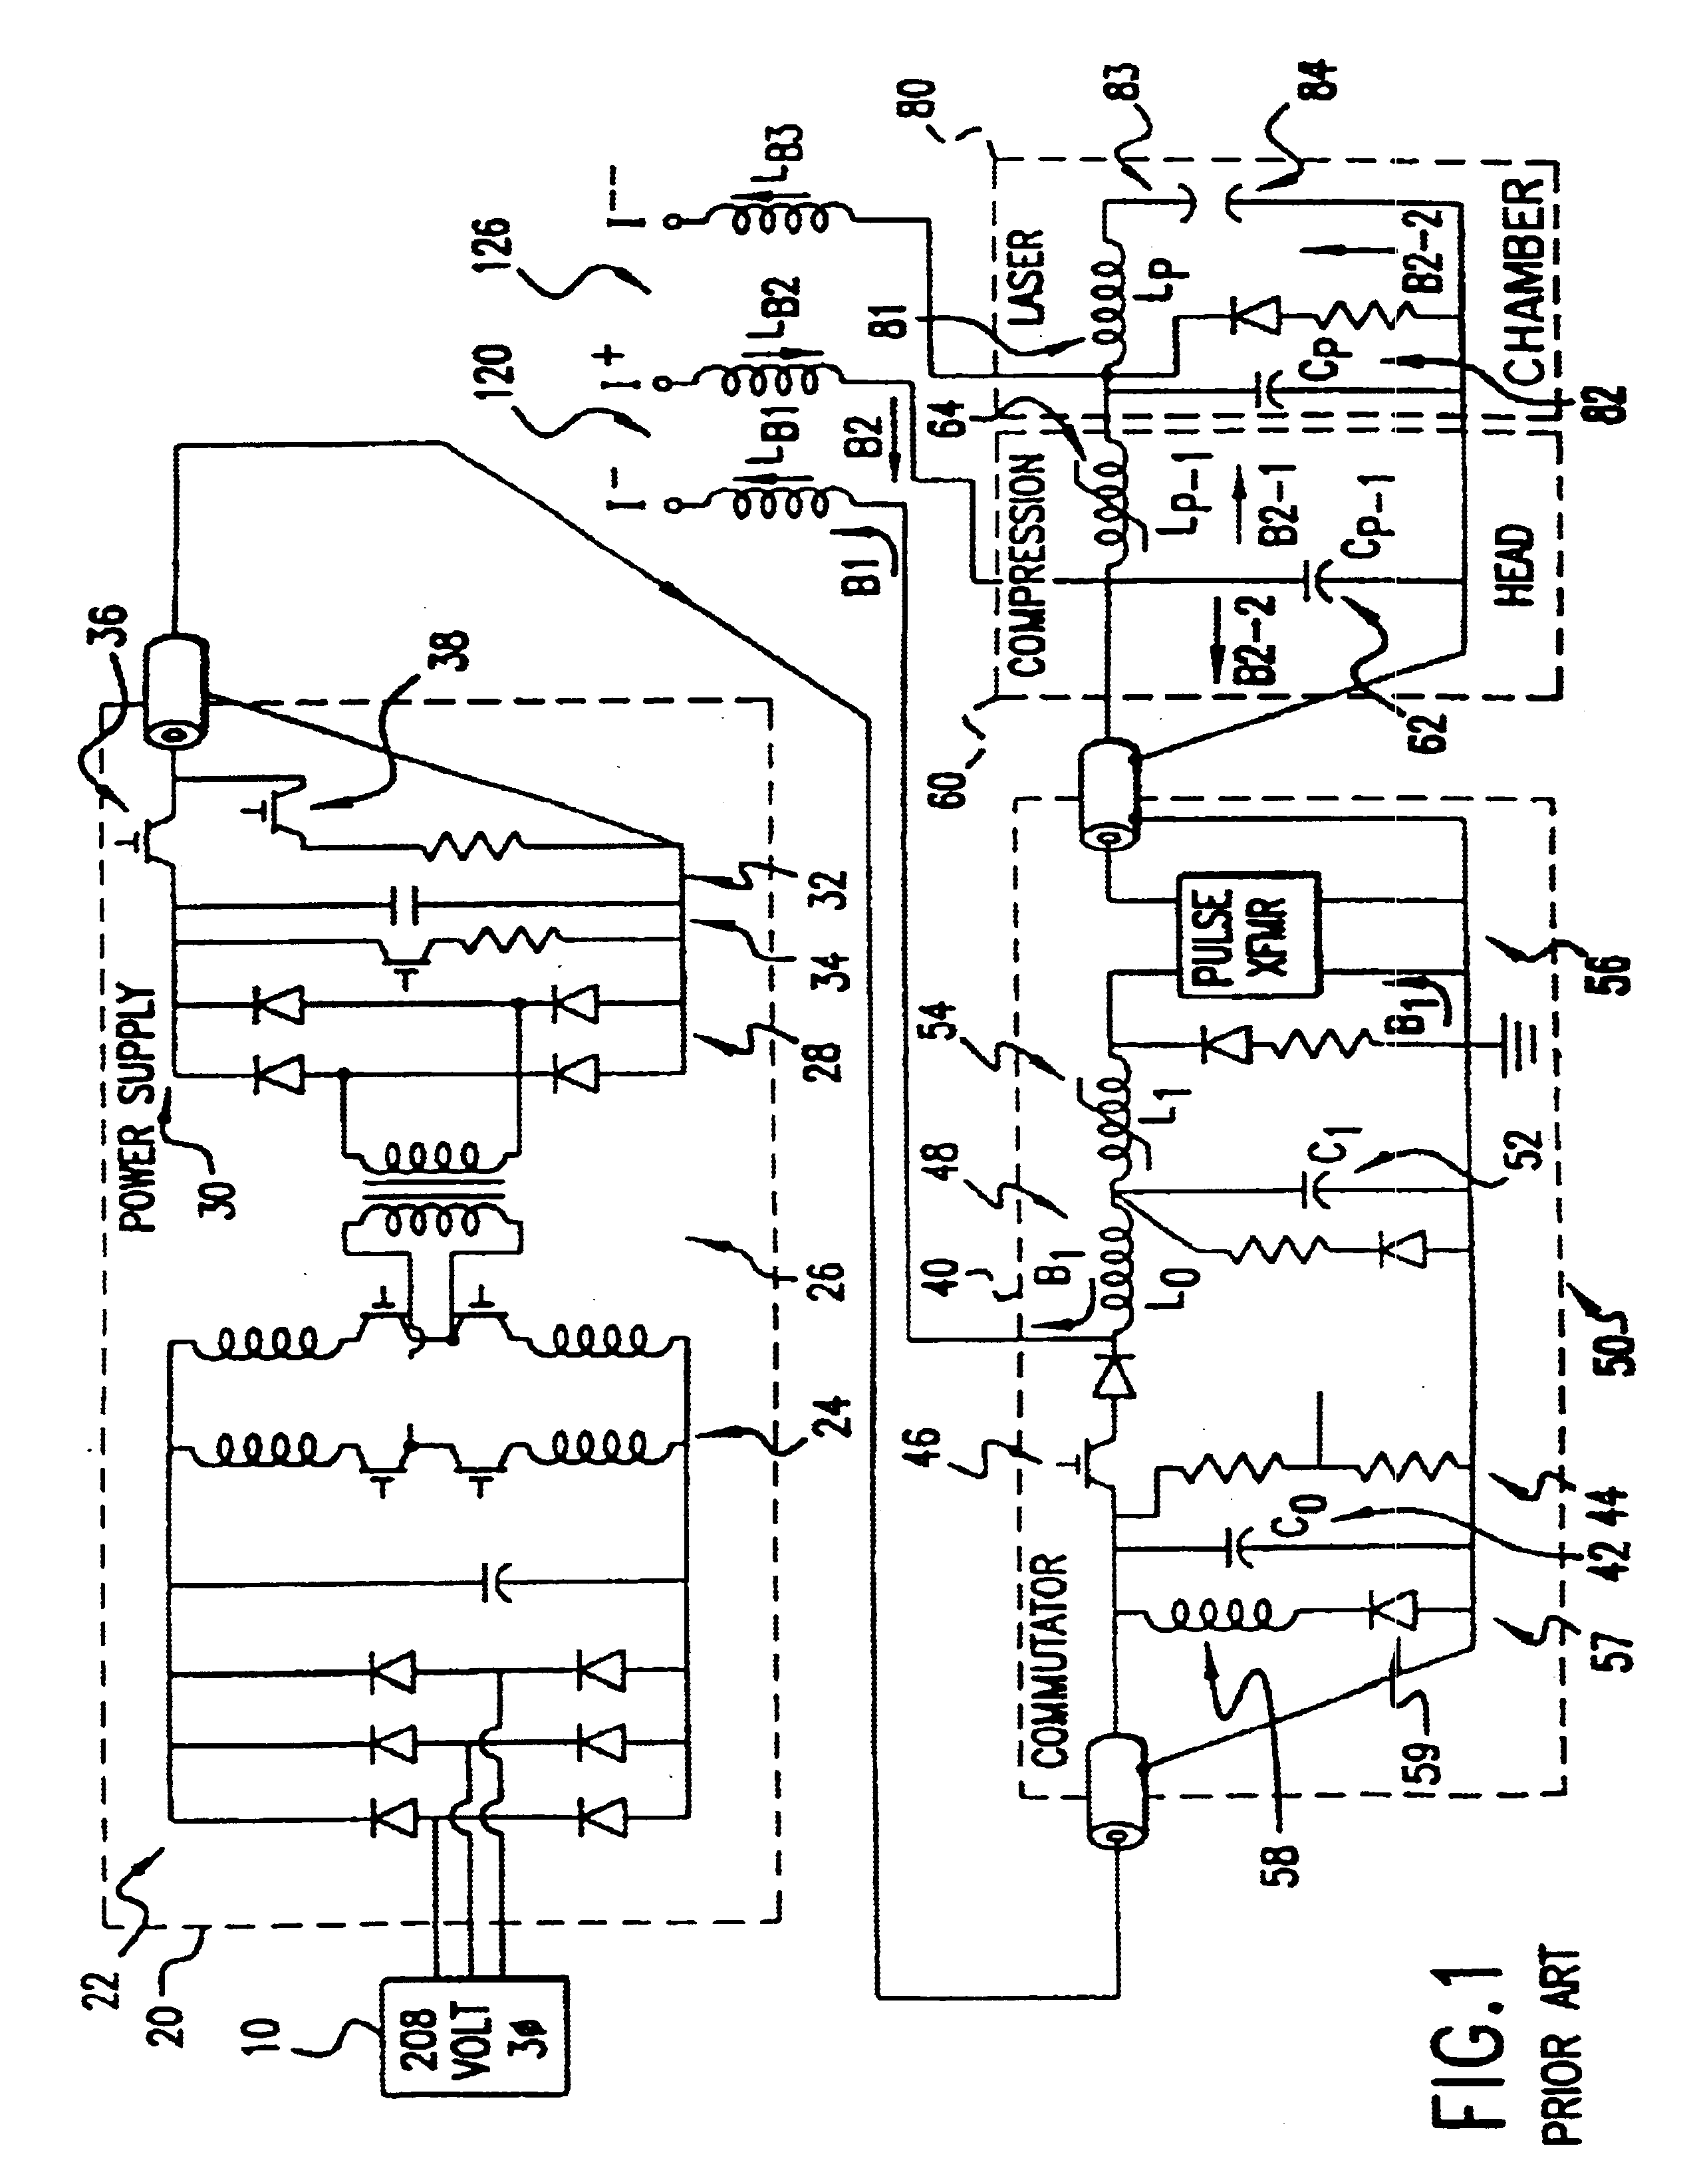 Long-pulse pulse power system for gas discharge laser